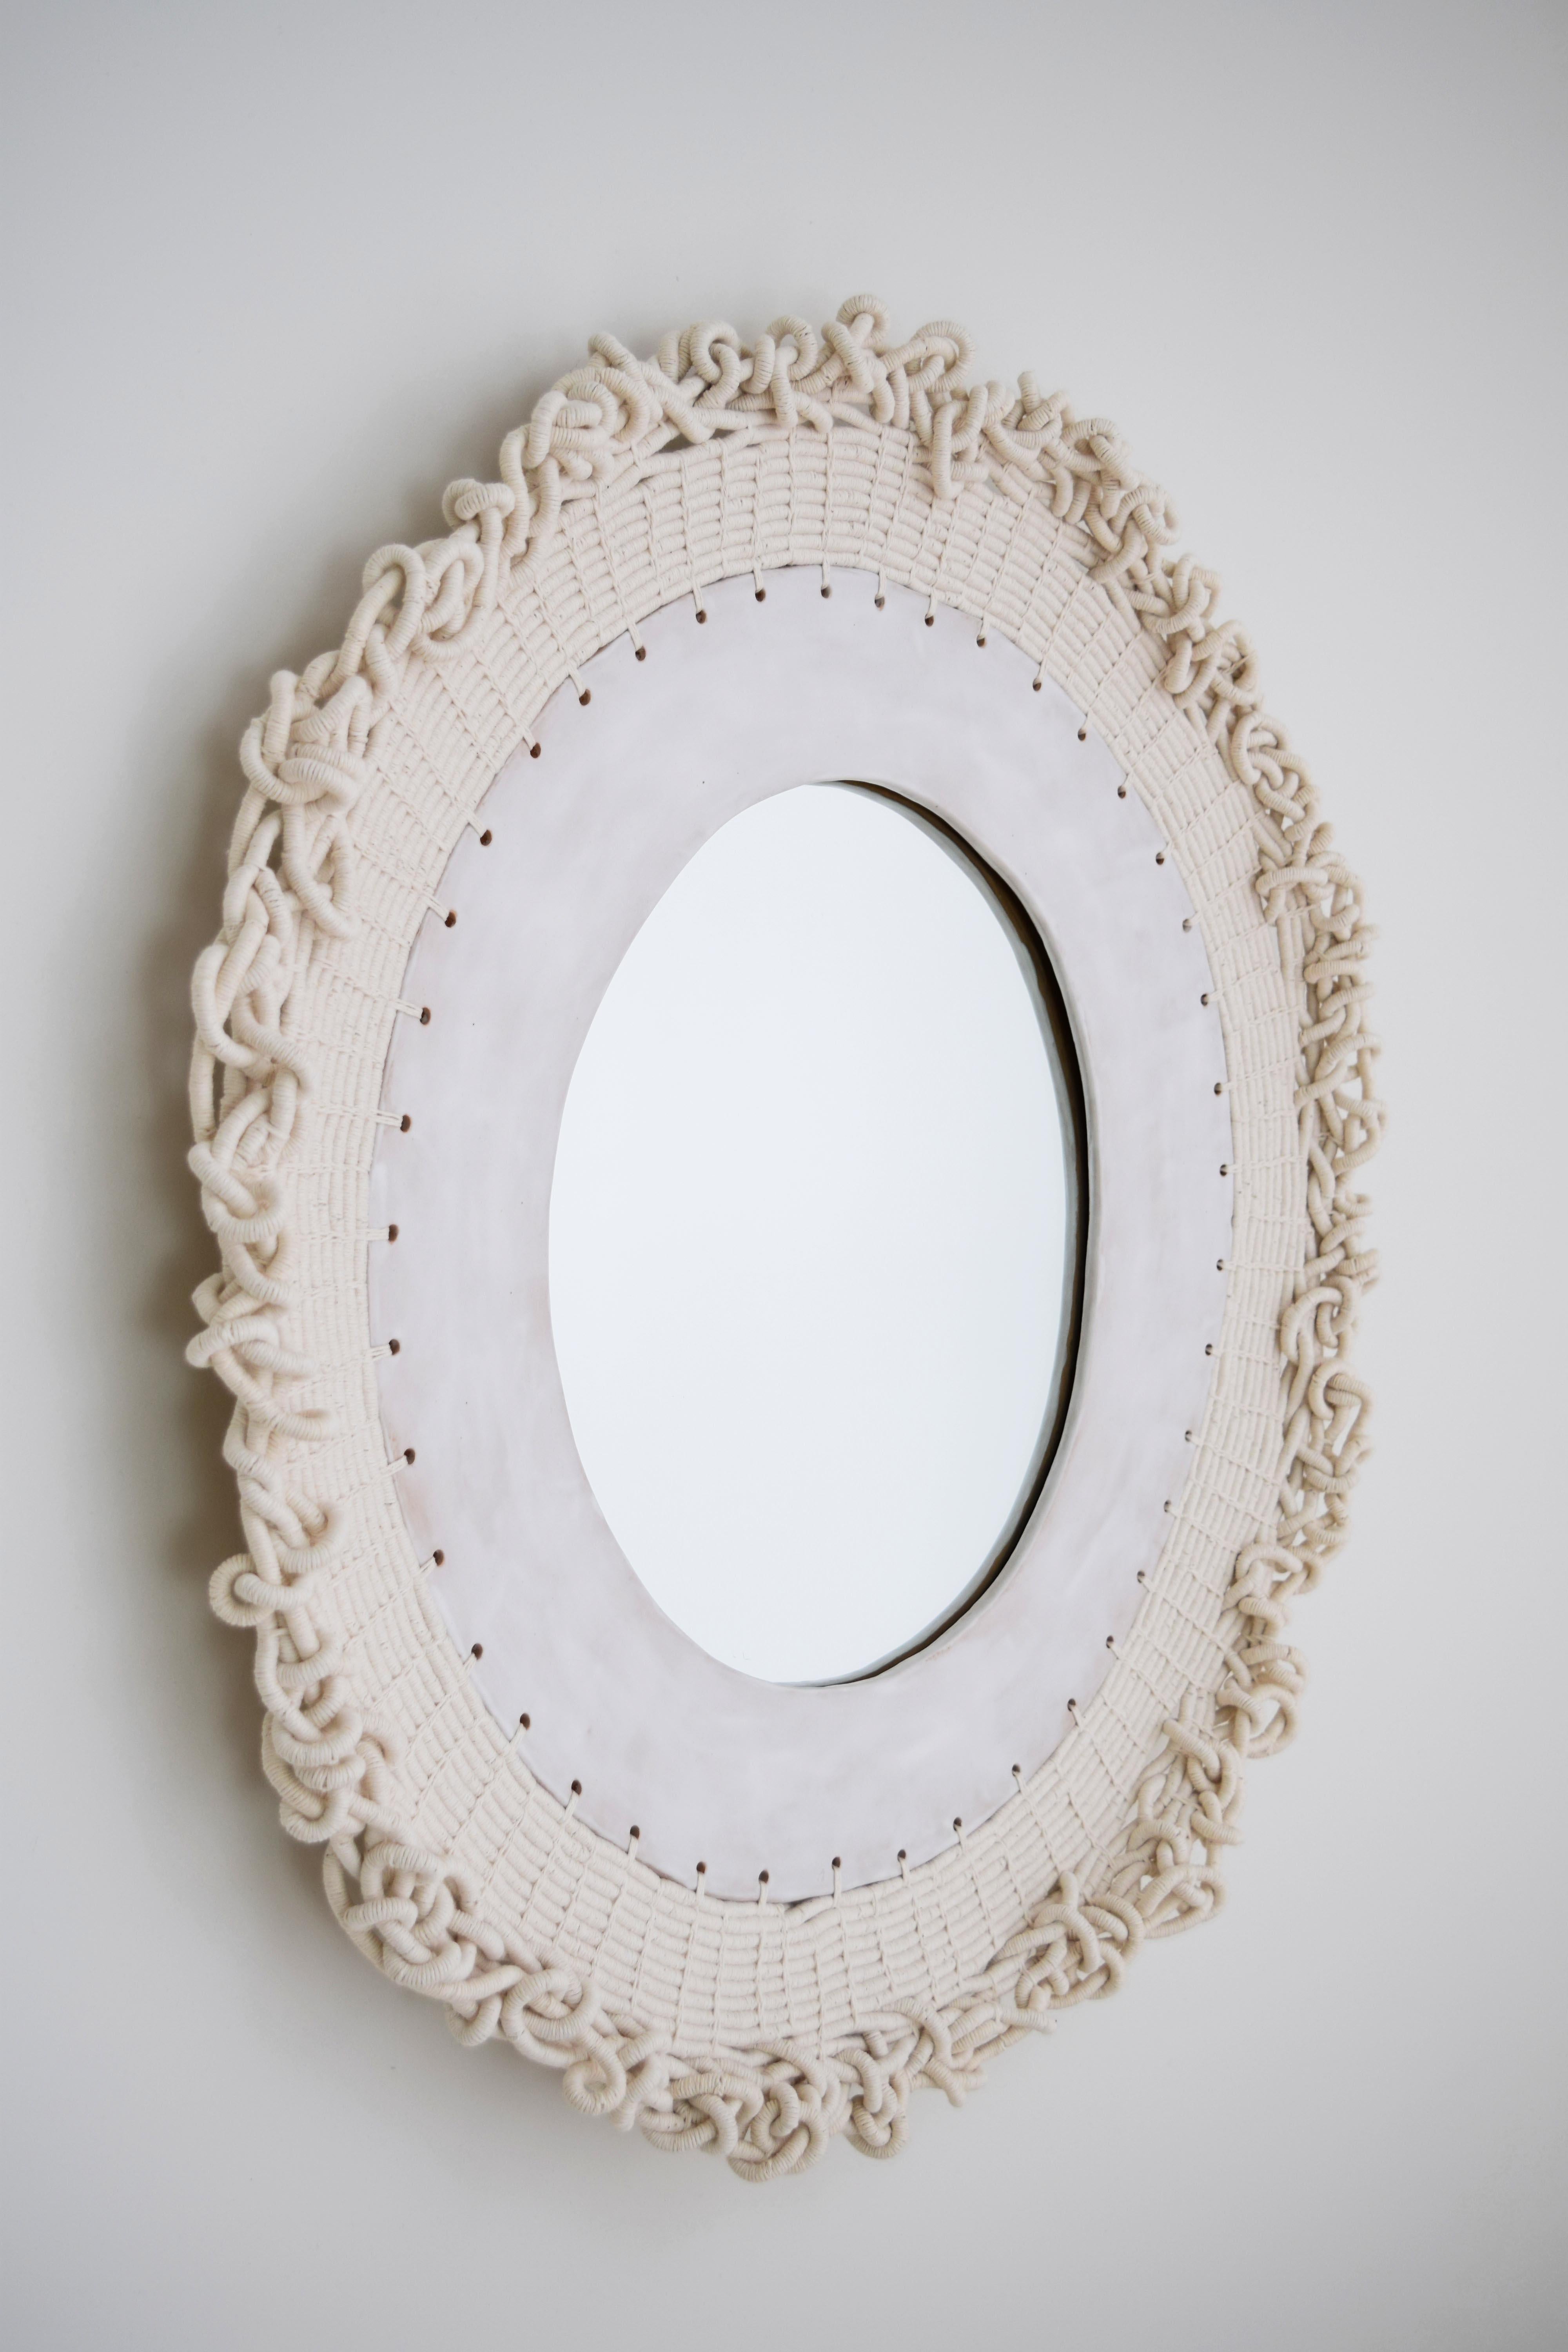 Mirror #773 by Karen Gayle Tinney.

Mirror with a hand formed stoneware frame glazed in satin white. Woven white exterior frame with organic three dimensional shape. Black felt backing on mirror with hanging wire included.

Measures: 30